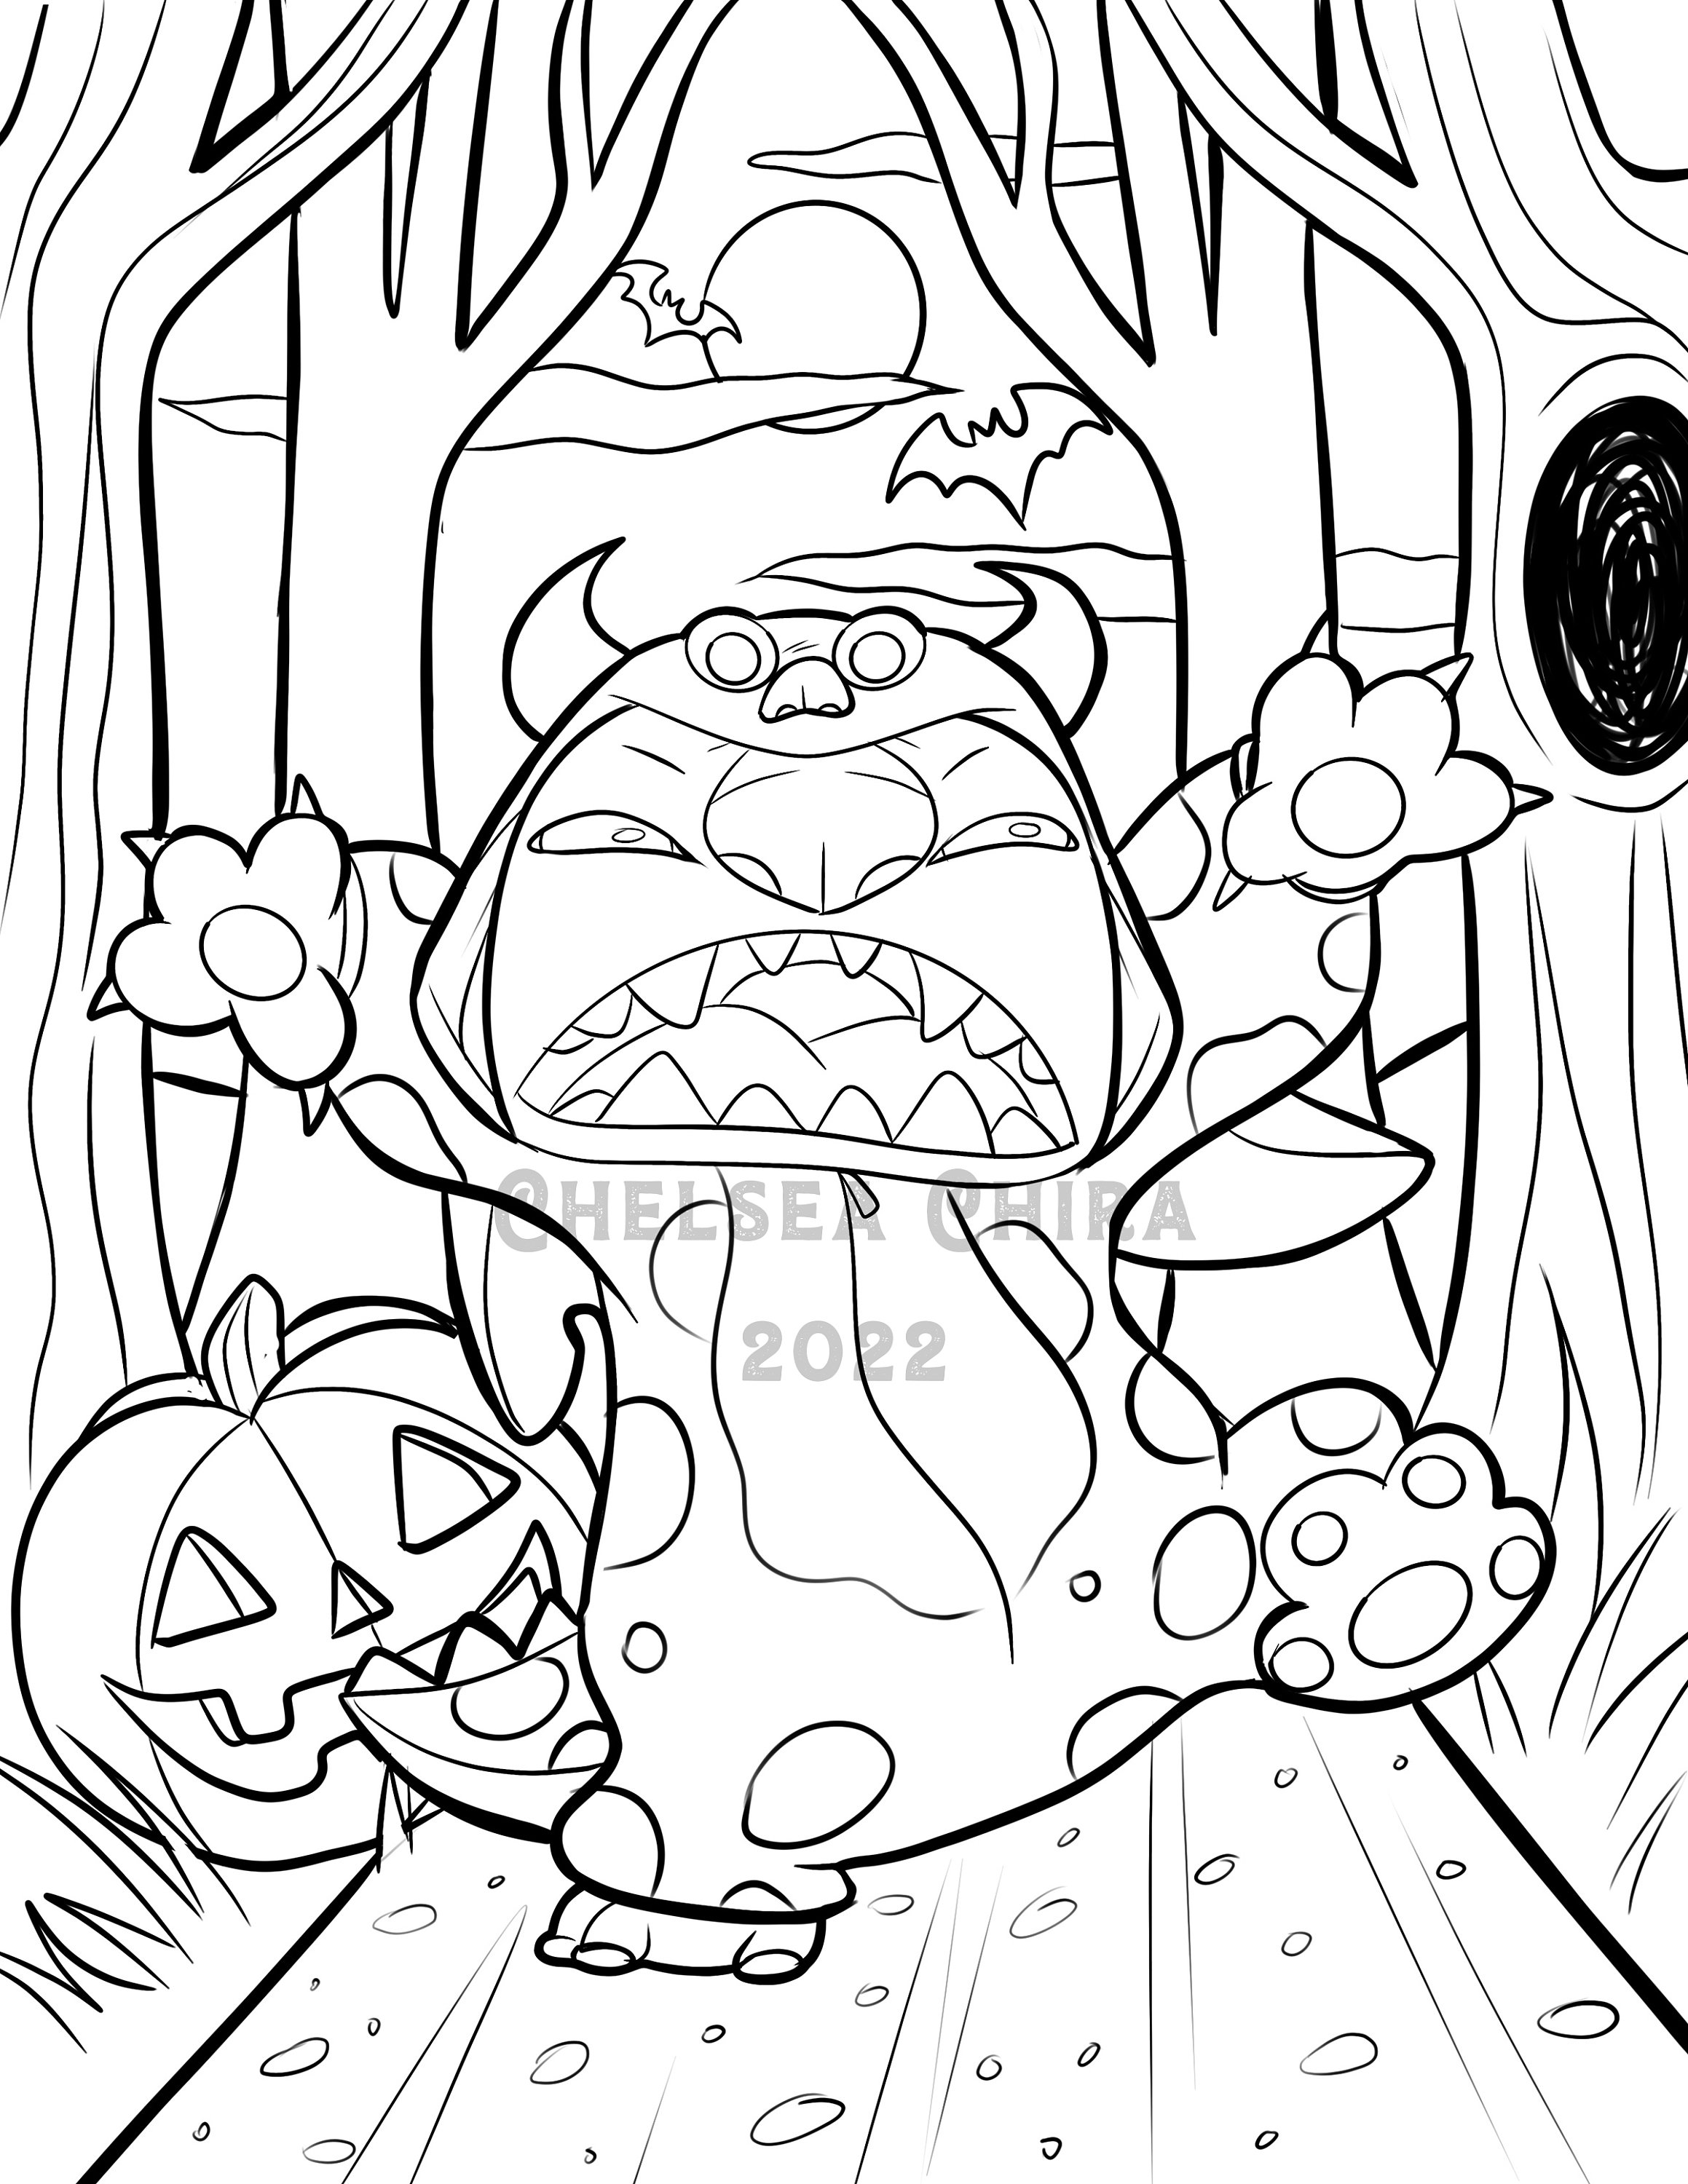 Halloween Stitch Coloring Sheet - Etsy